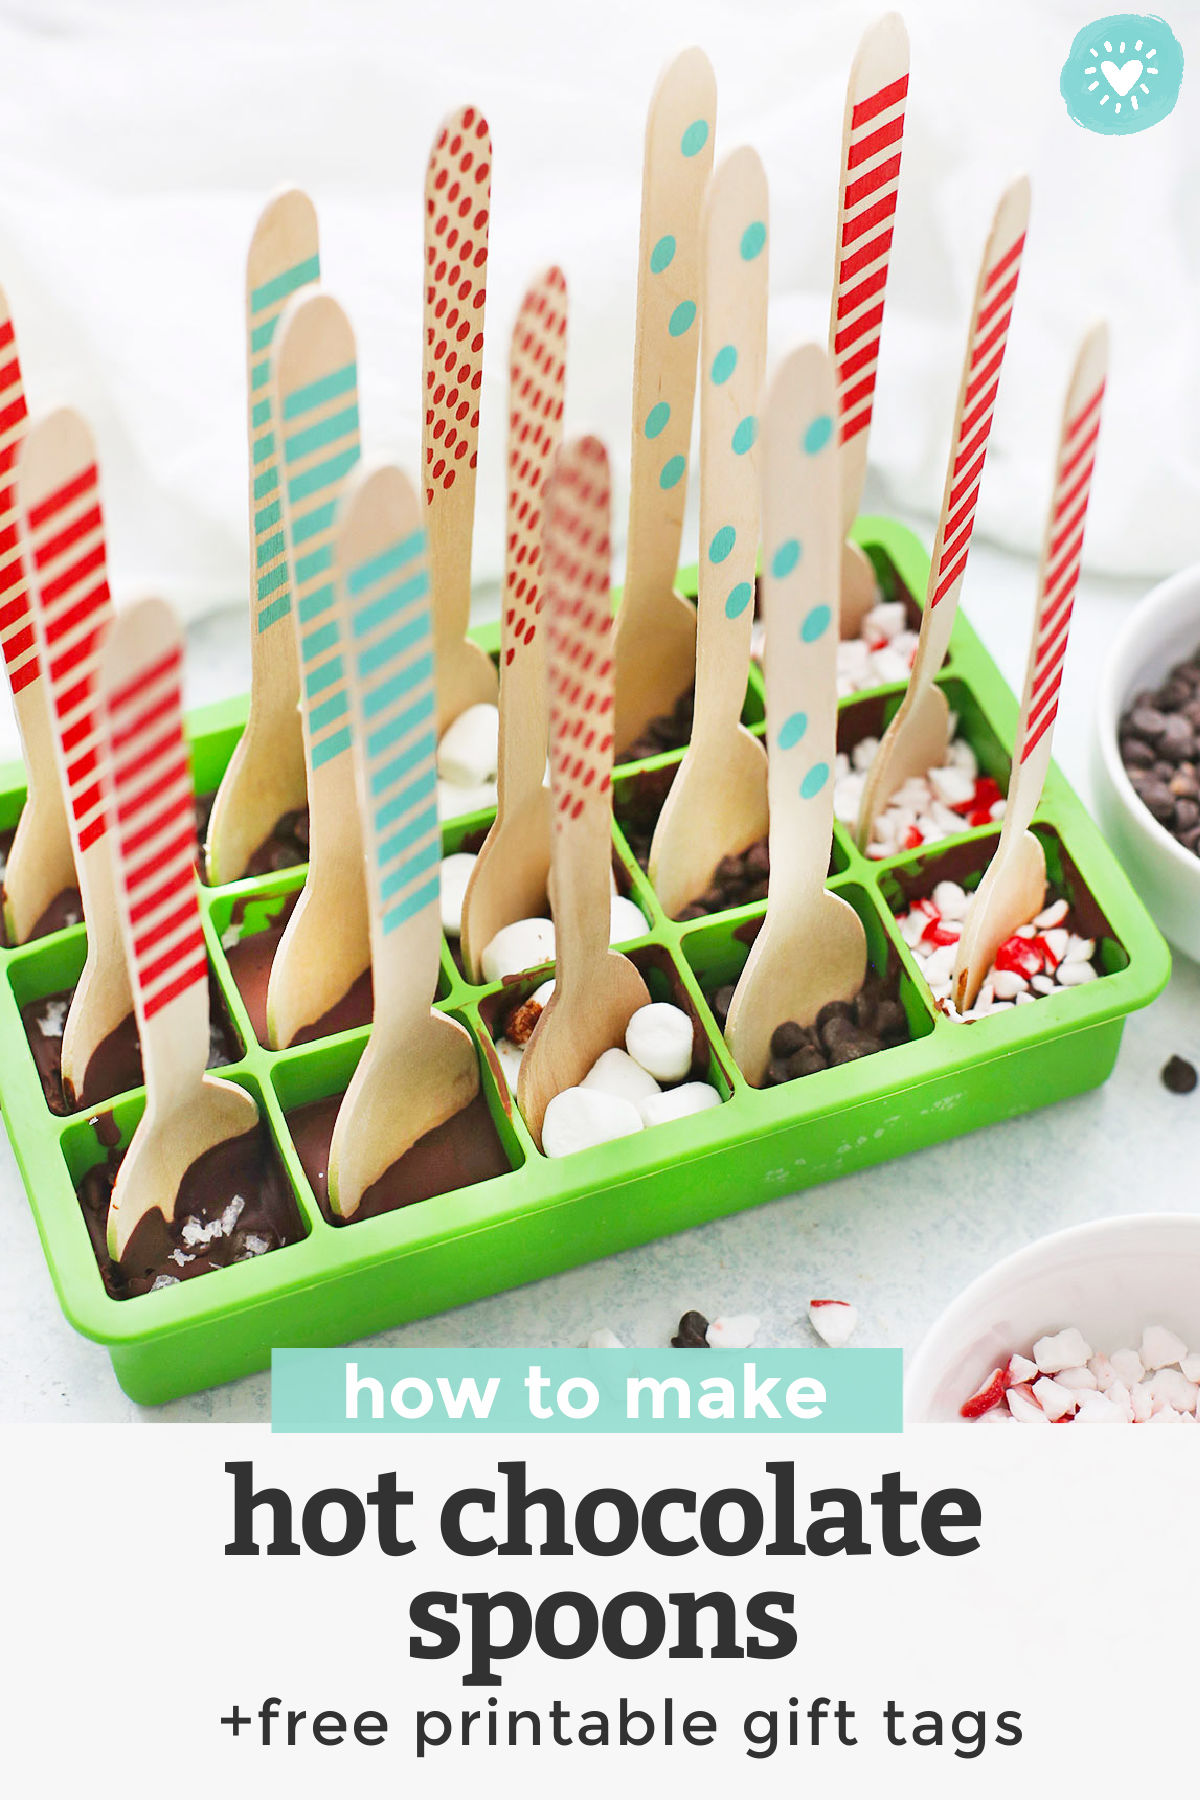 Hot Chocolate Spoons + FREE PRINTABLE GIFT TAGS! These chocolate-coated spoons are perfect for making homemade hot chocolate. They make a fun winter project or easy DIY holiday gift for friends and neighbors! (Gluten-free, dairy-free, paleo & vegan-friendly!) #hotchocolate #diygift #ediblegift #holidaygift #hotcocoa #hotchocolatespoon #vegan #allergyfriendly #paleo #freeprintable #printablegifttag